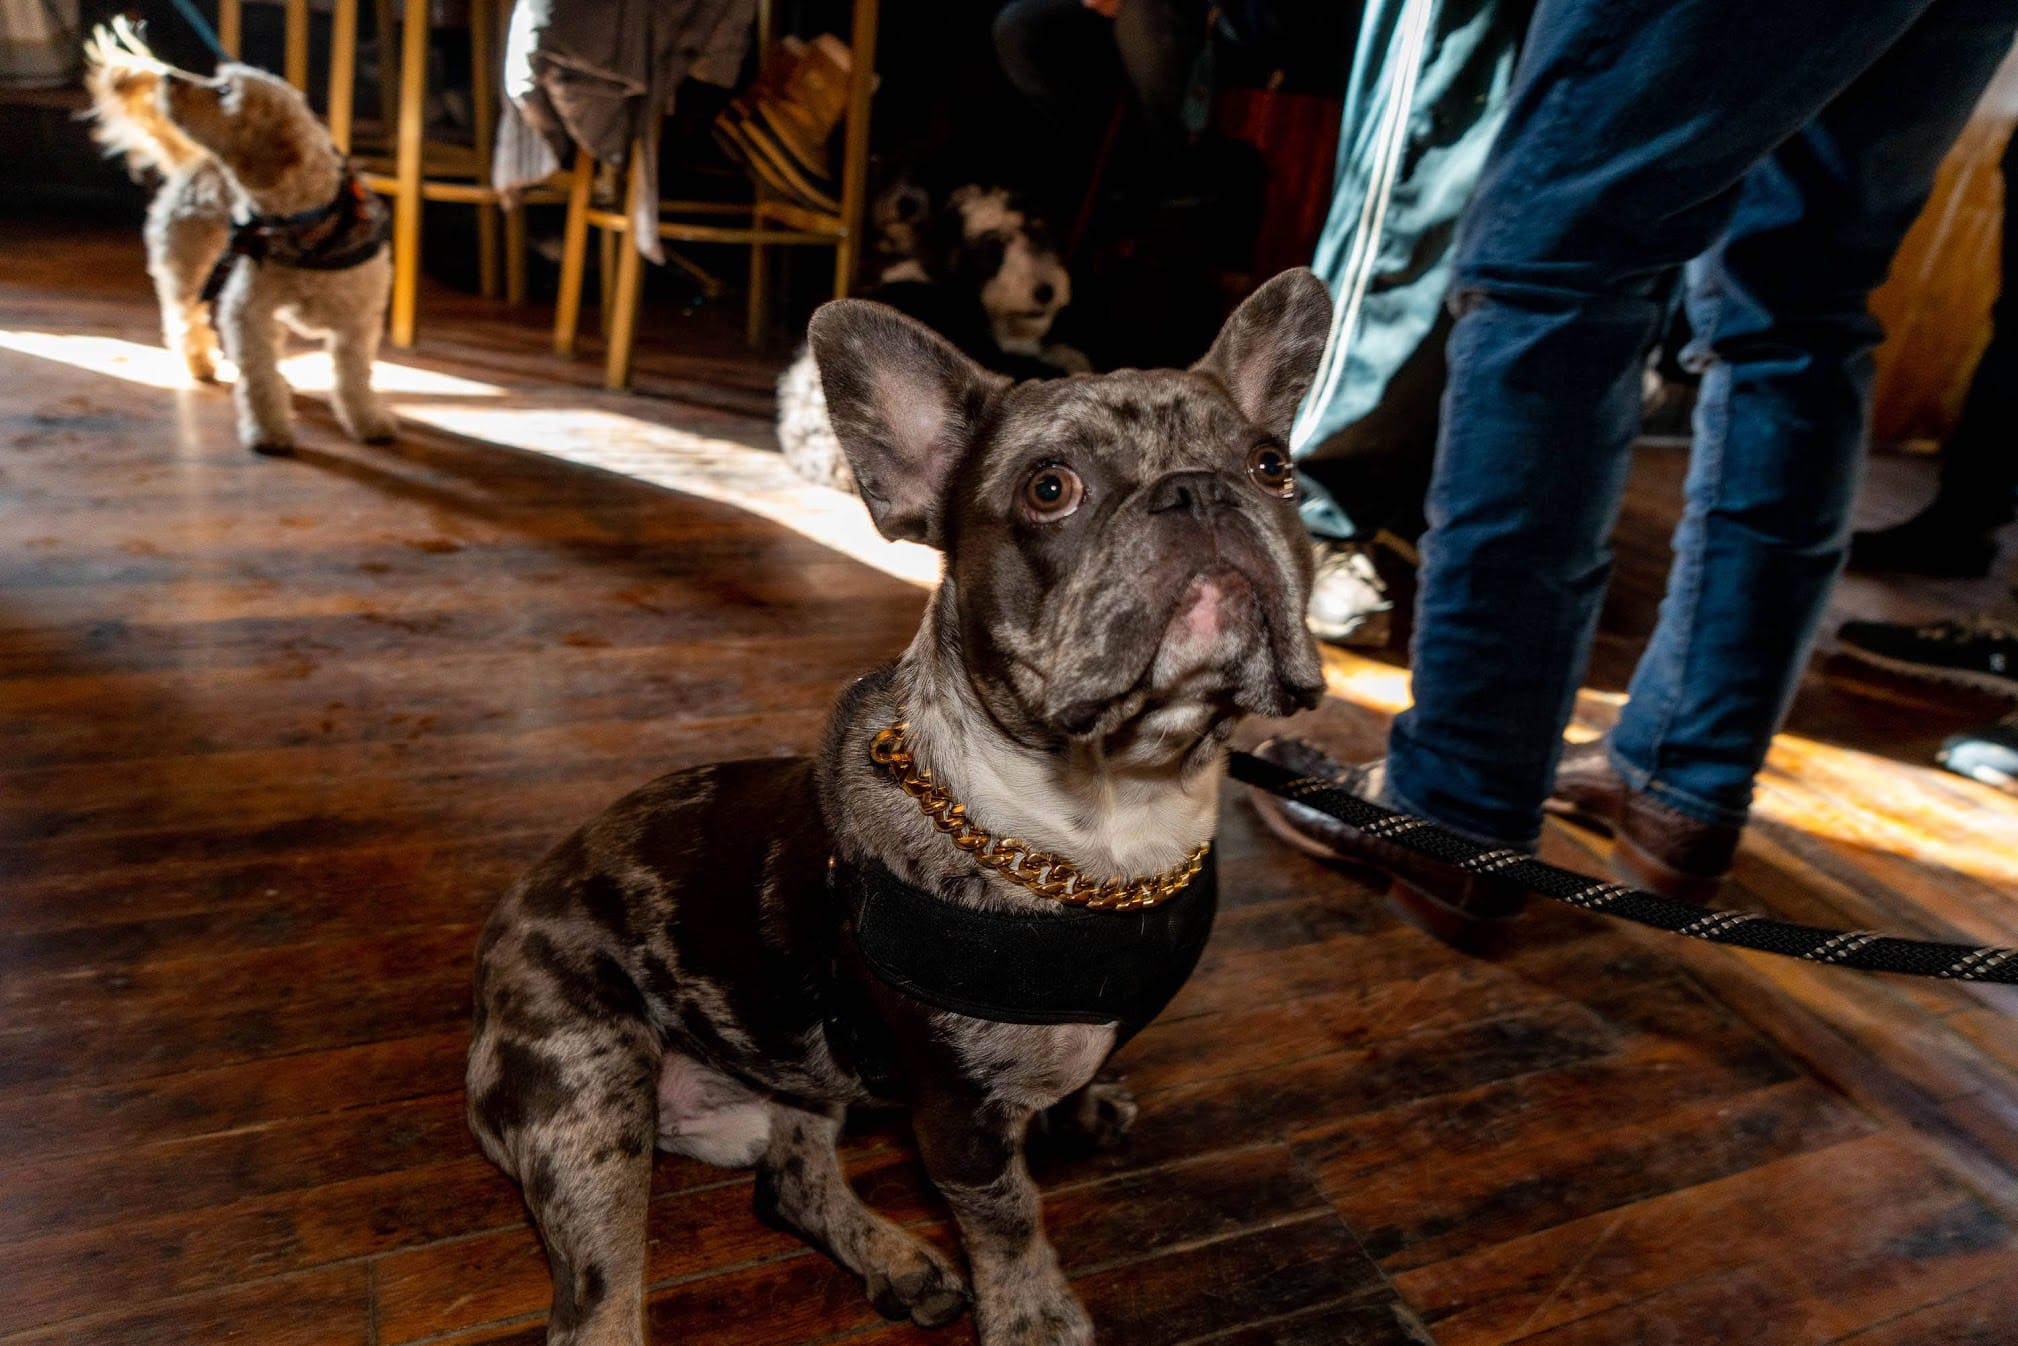 Photo of a dog wearing a necklace